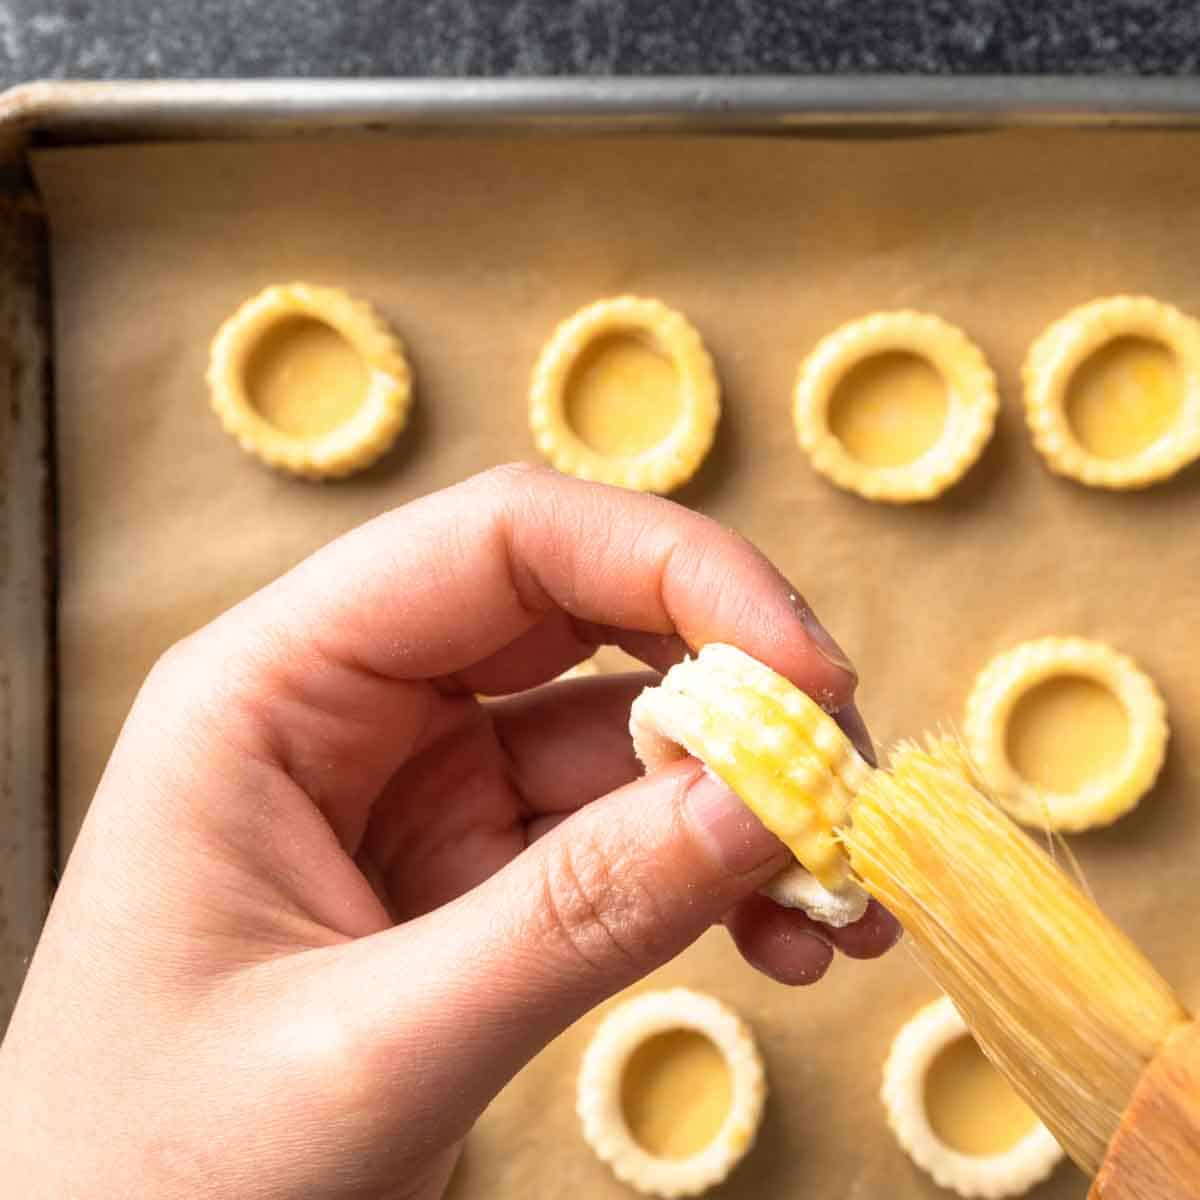 Using a pastry brush to glaze the edges of chilled, raw vol-au-vent pastries.